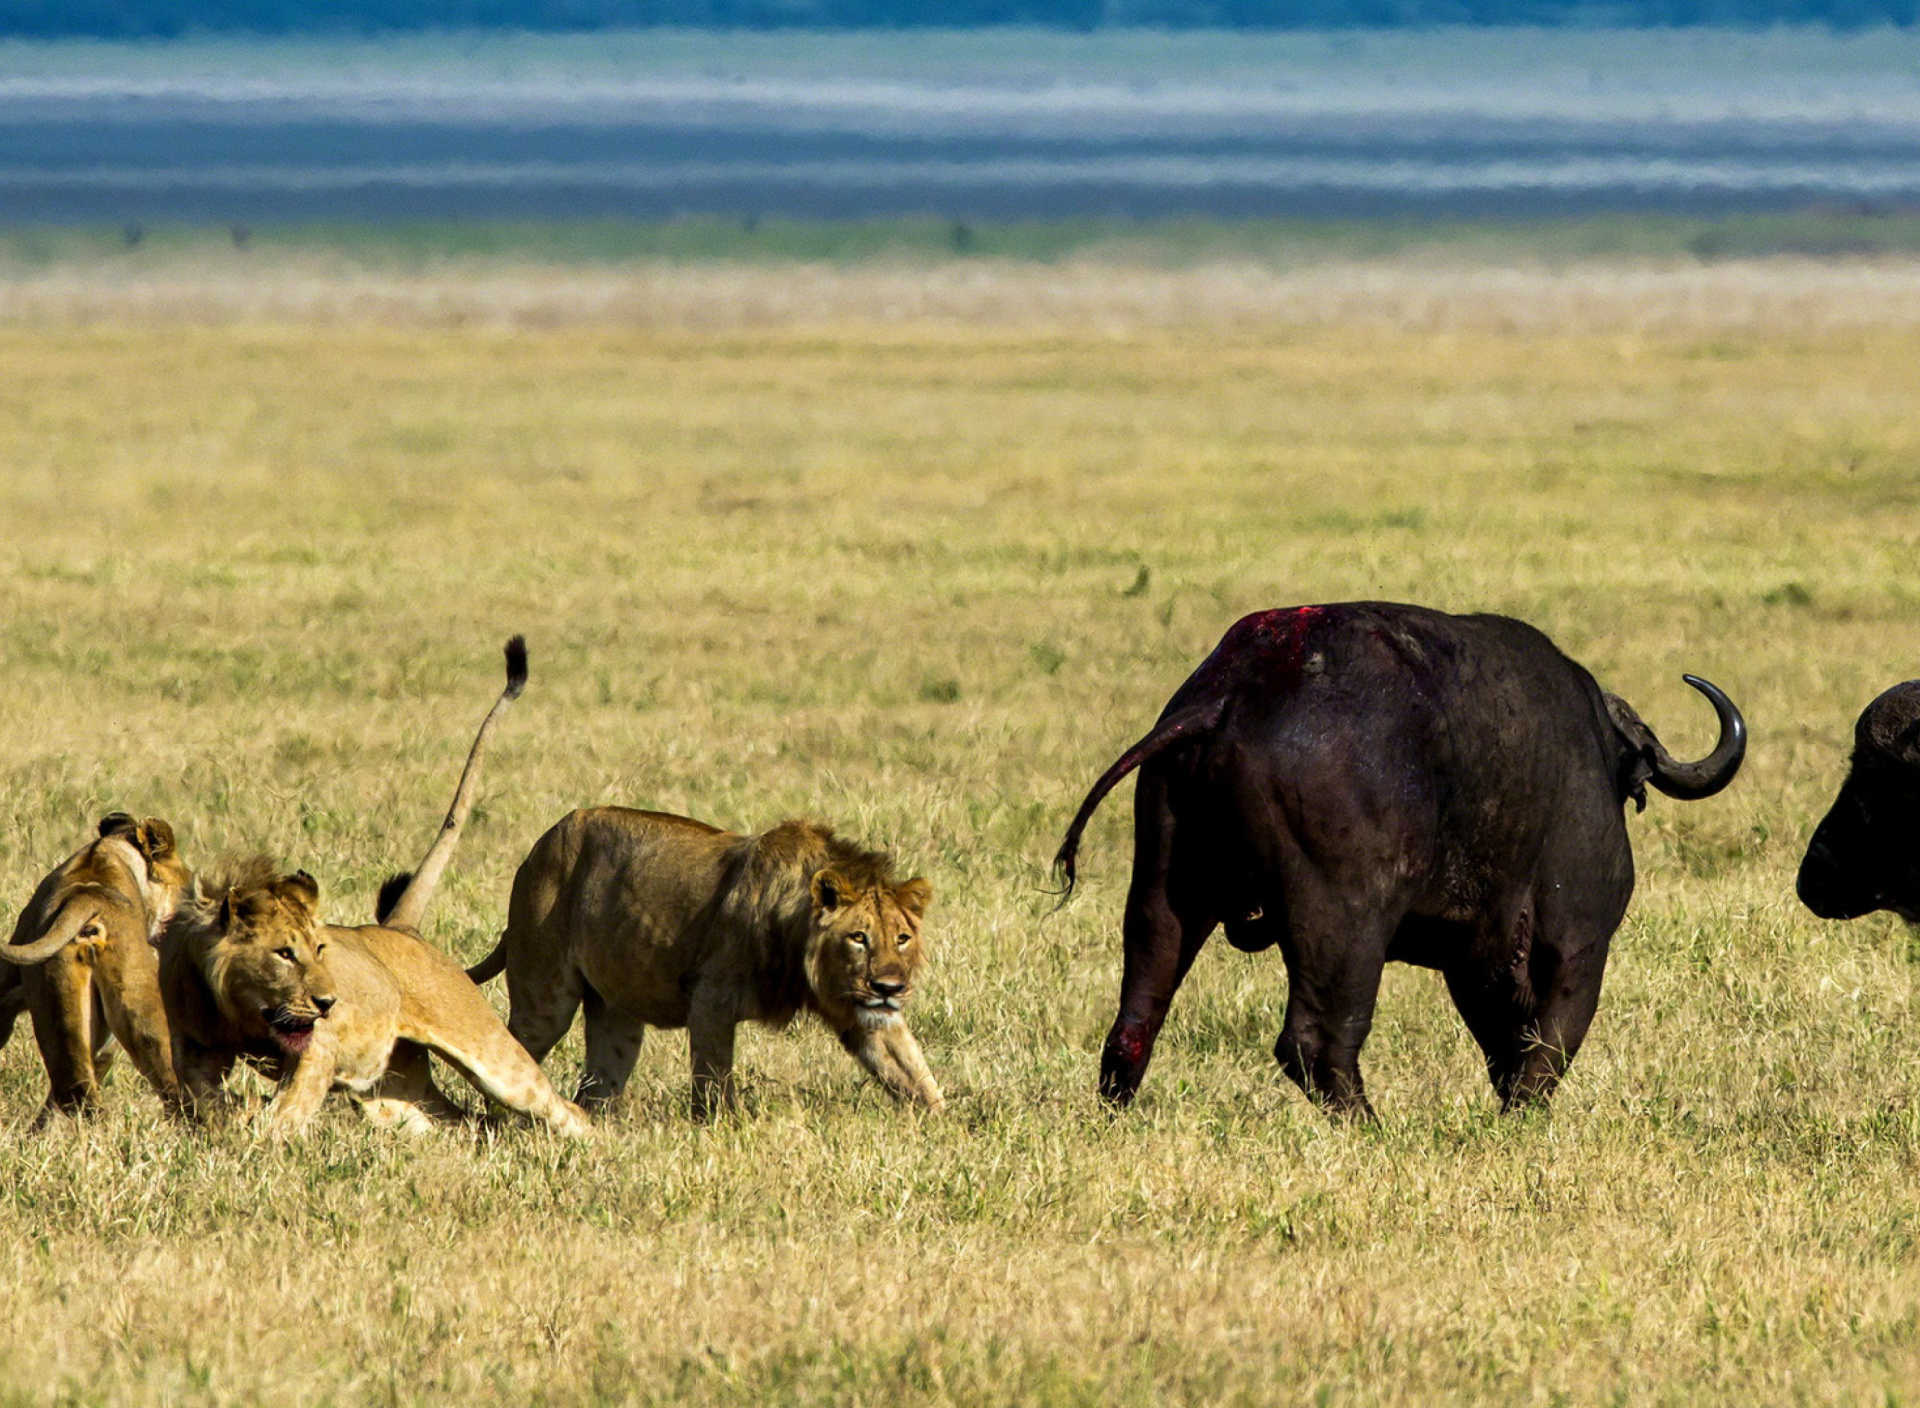 Das Lions and Buffaloes Wallpaper 1920x1408